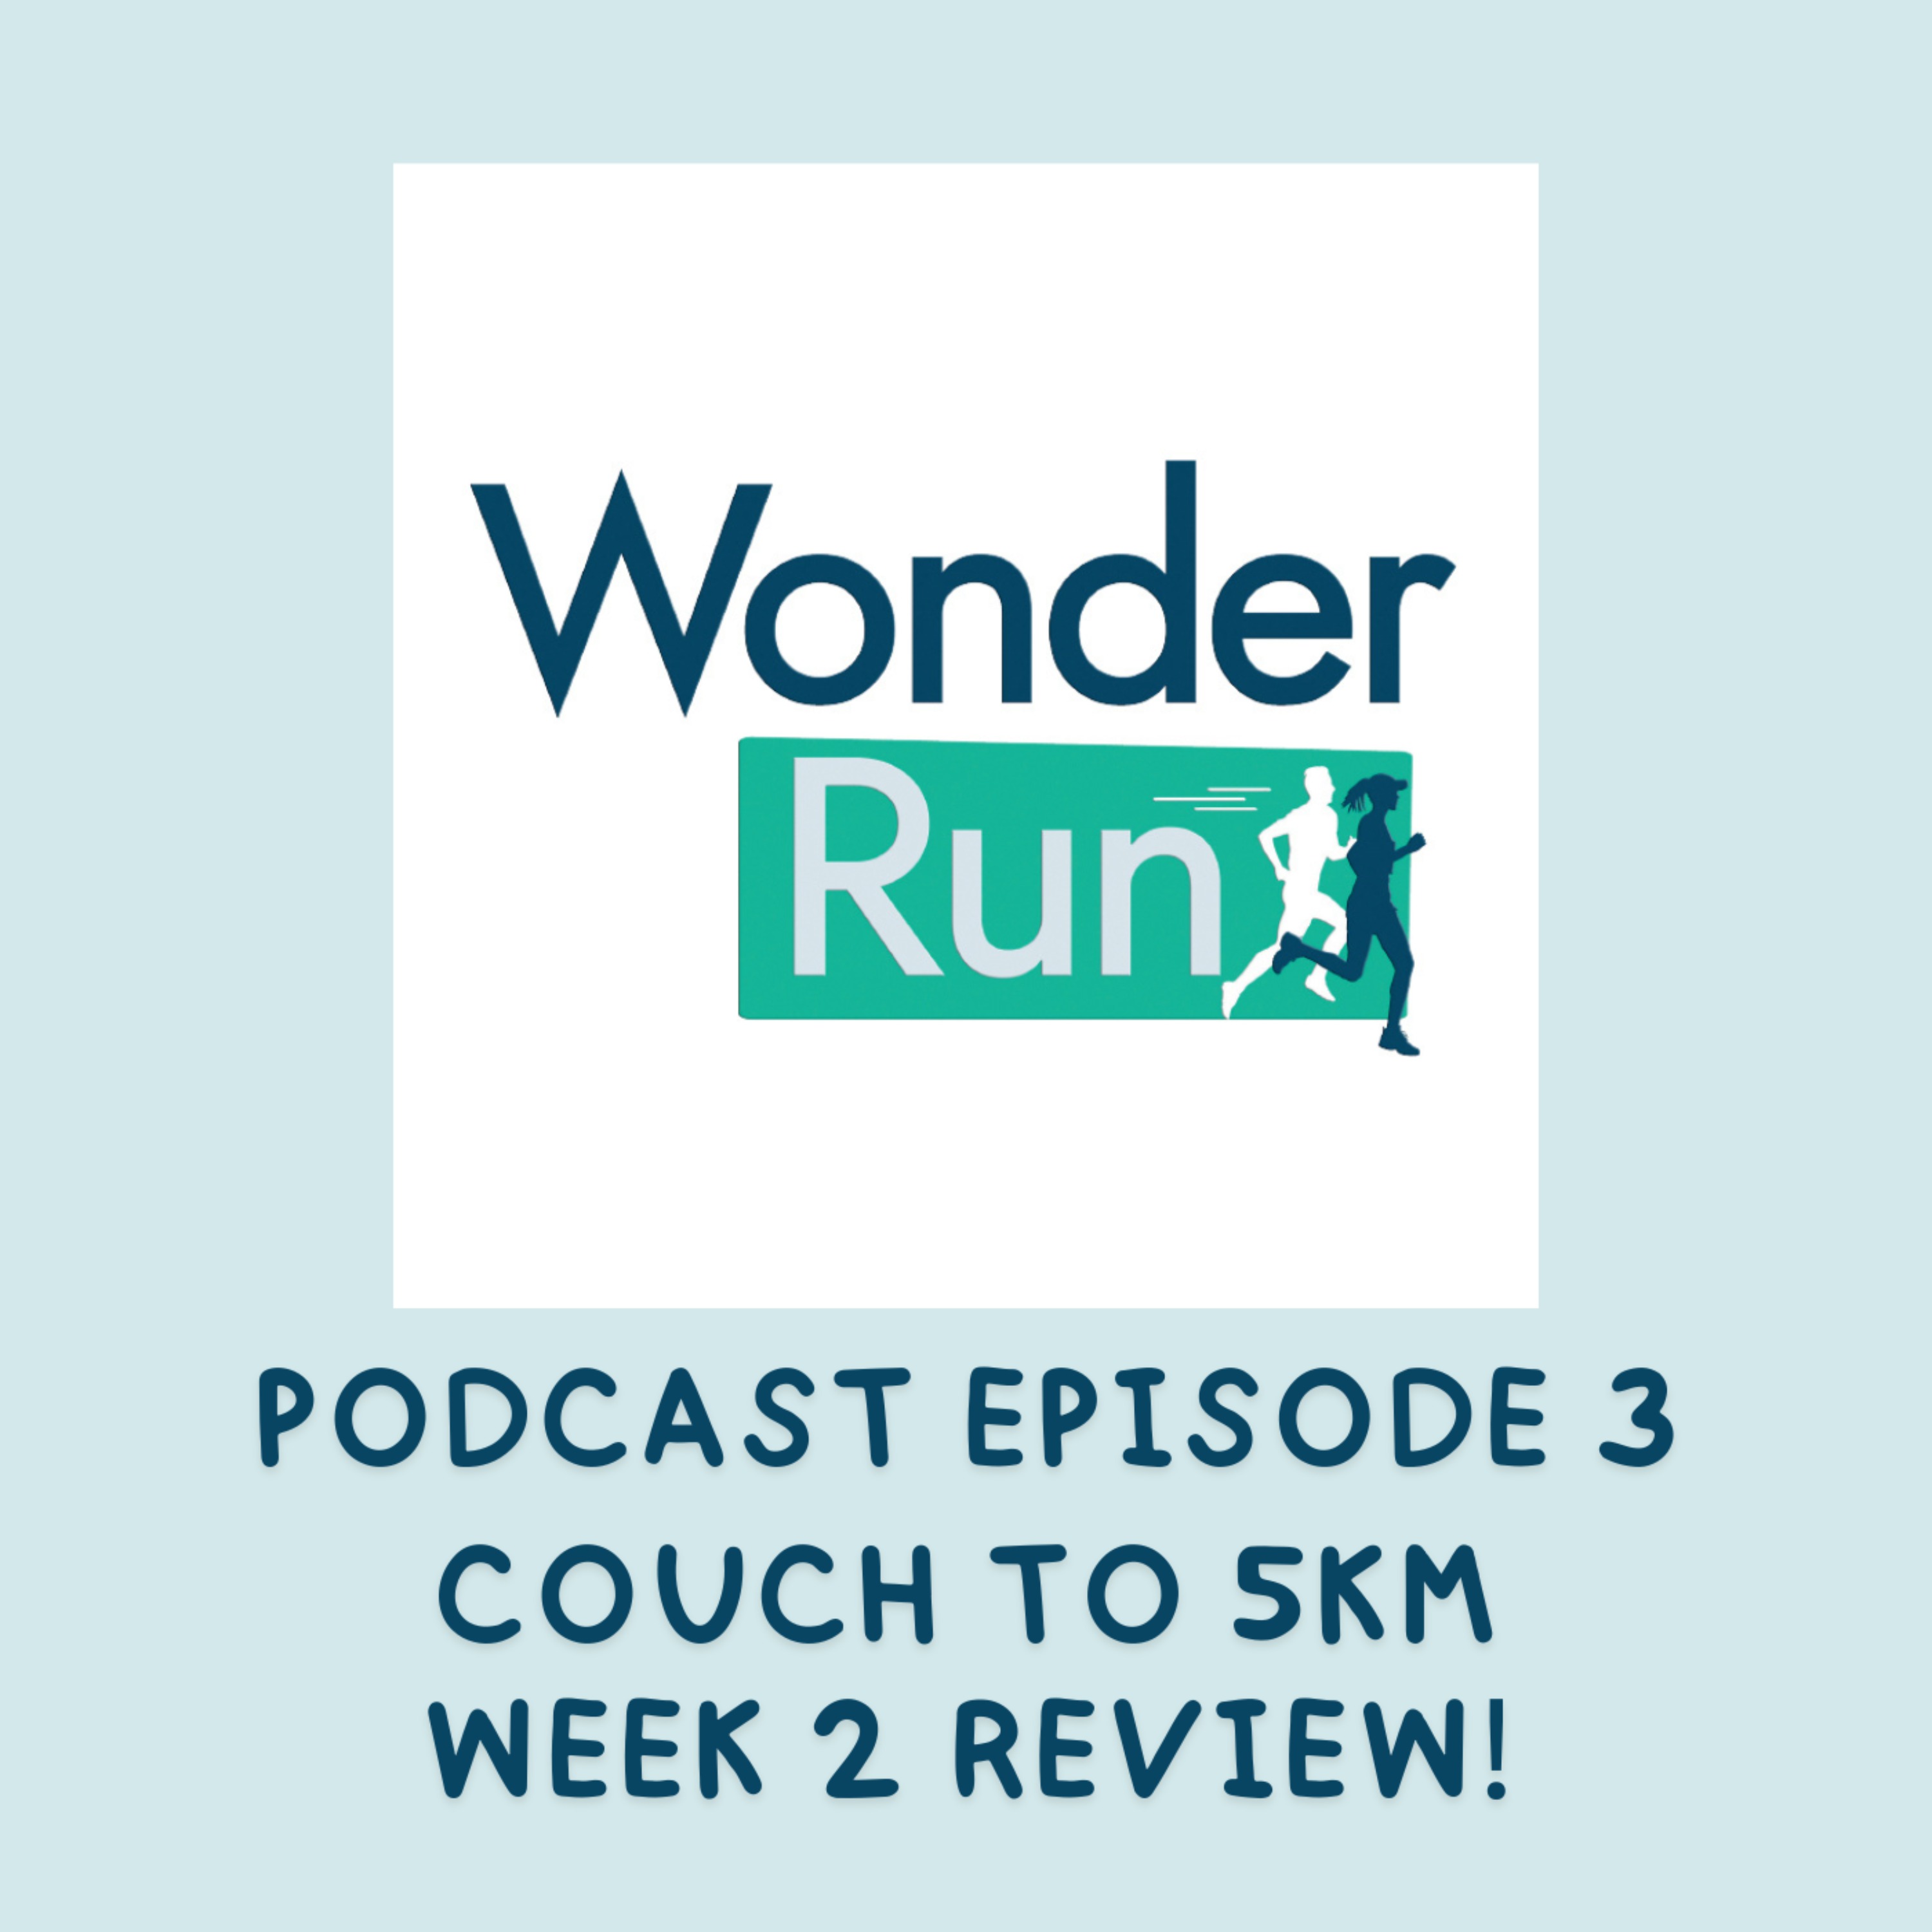 Couch to 5km - Week 2 Review!